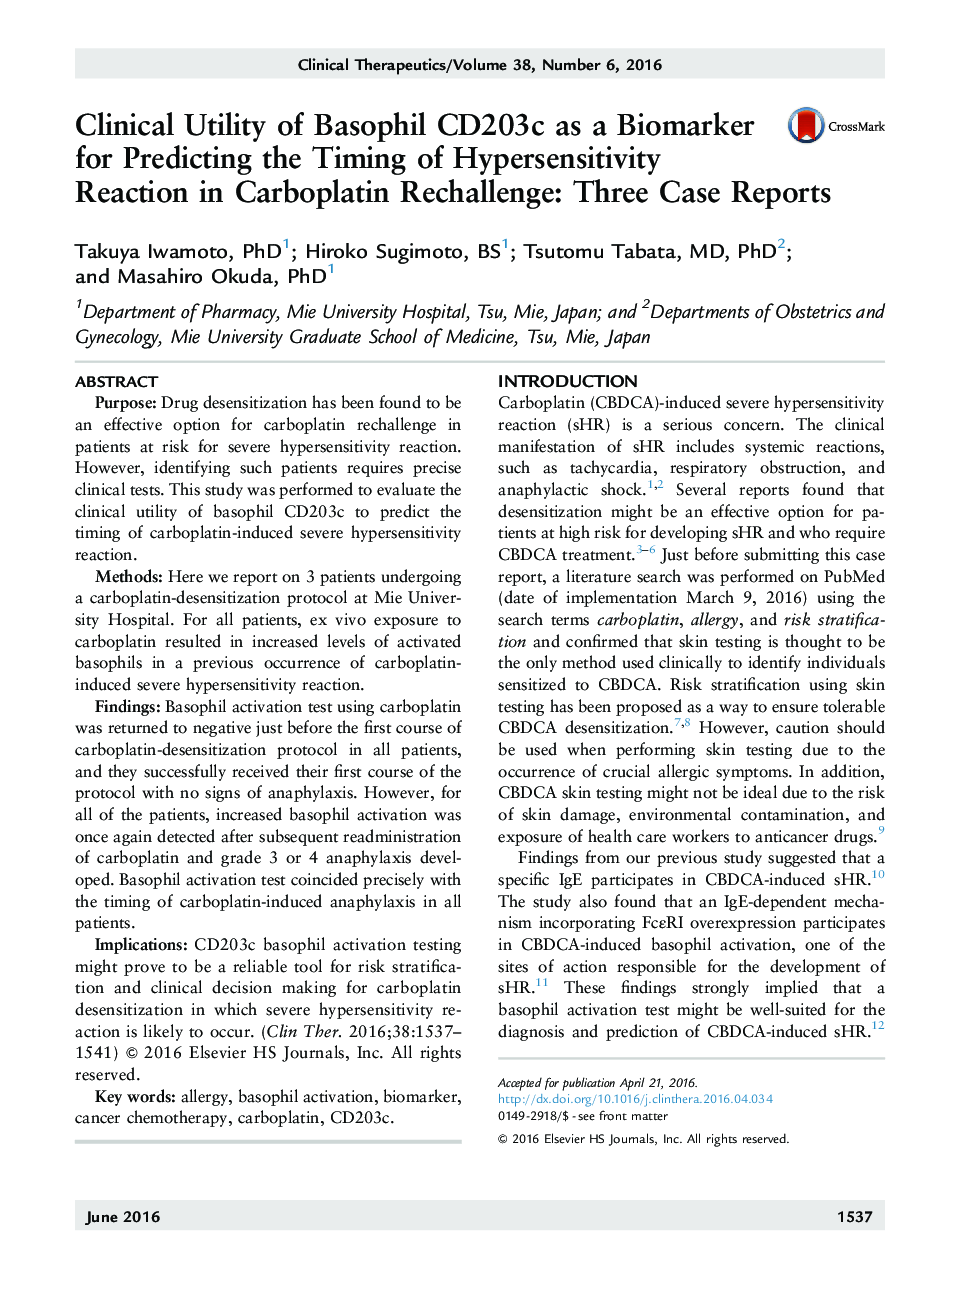 Clinical Utility of Basophil CD203c as a Biomarker for Predicting the Timing of Hypersensitivity Reaction in Carboplatin Rechallenge: Three Case Reports